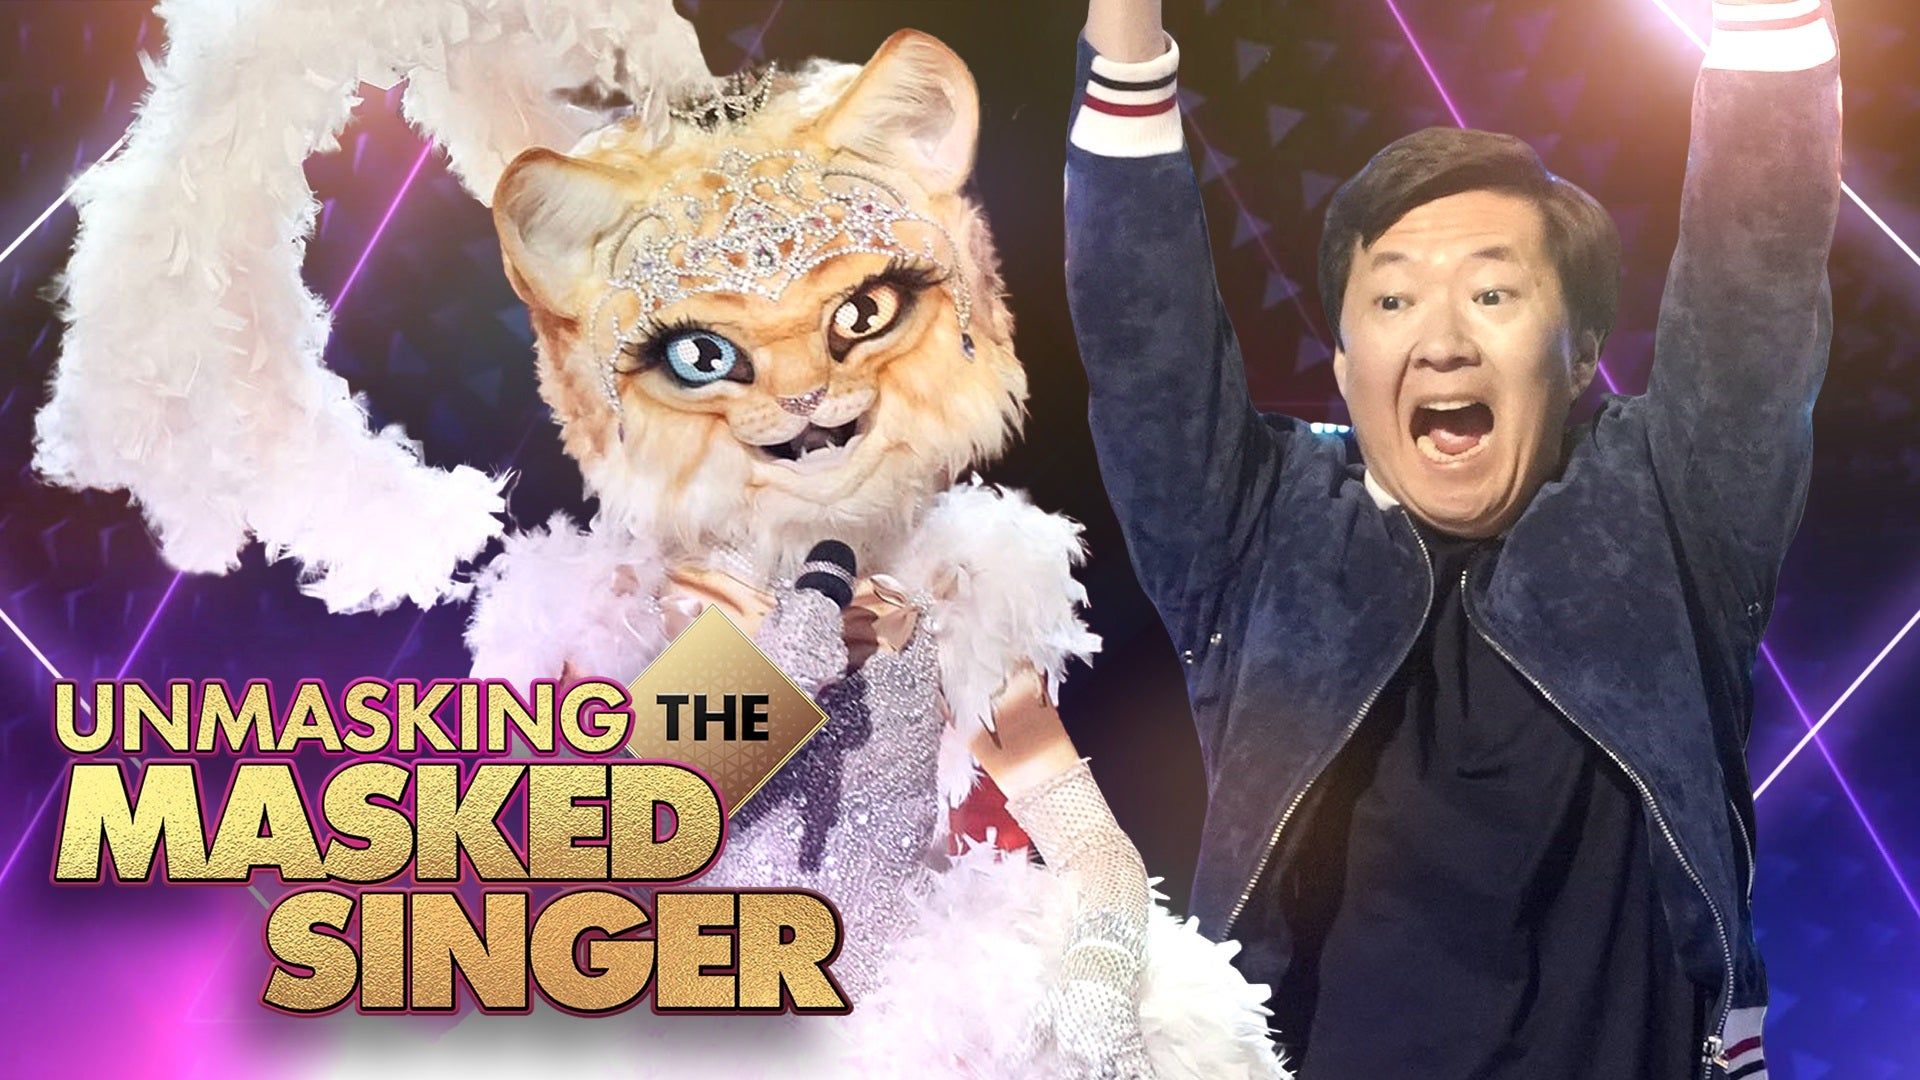 The Masked Singer': Season 3 Spoilers, Clues and Our Best Guesses at Secret Identities